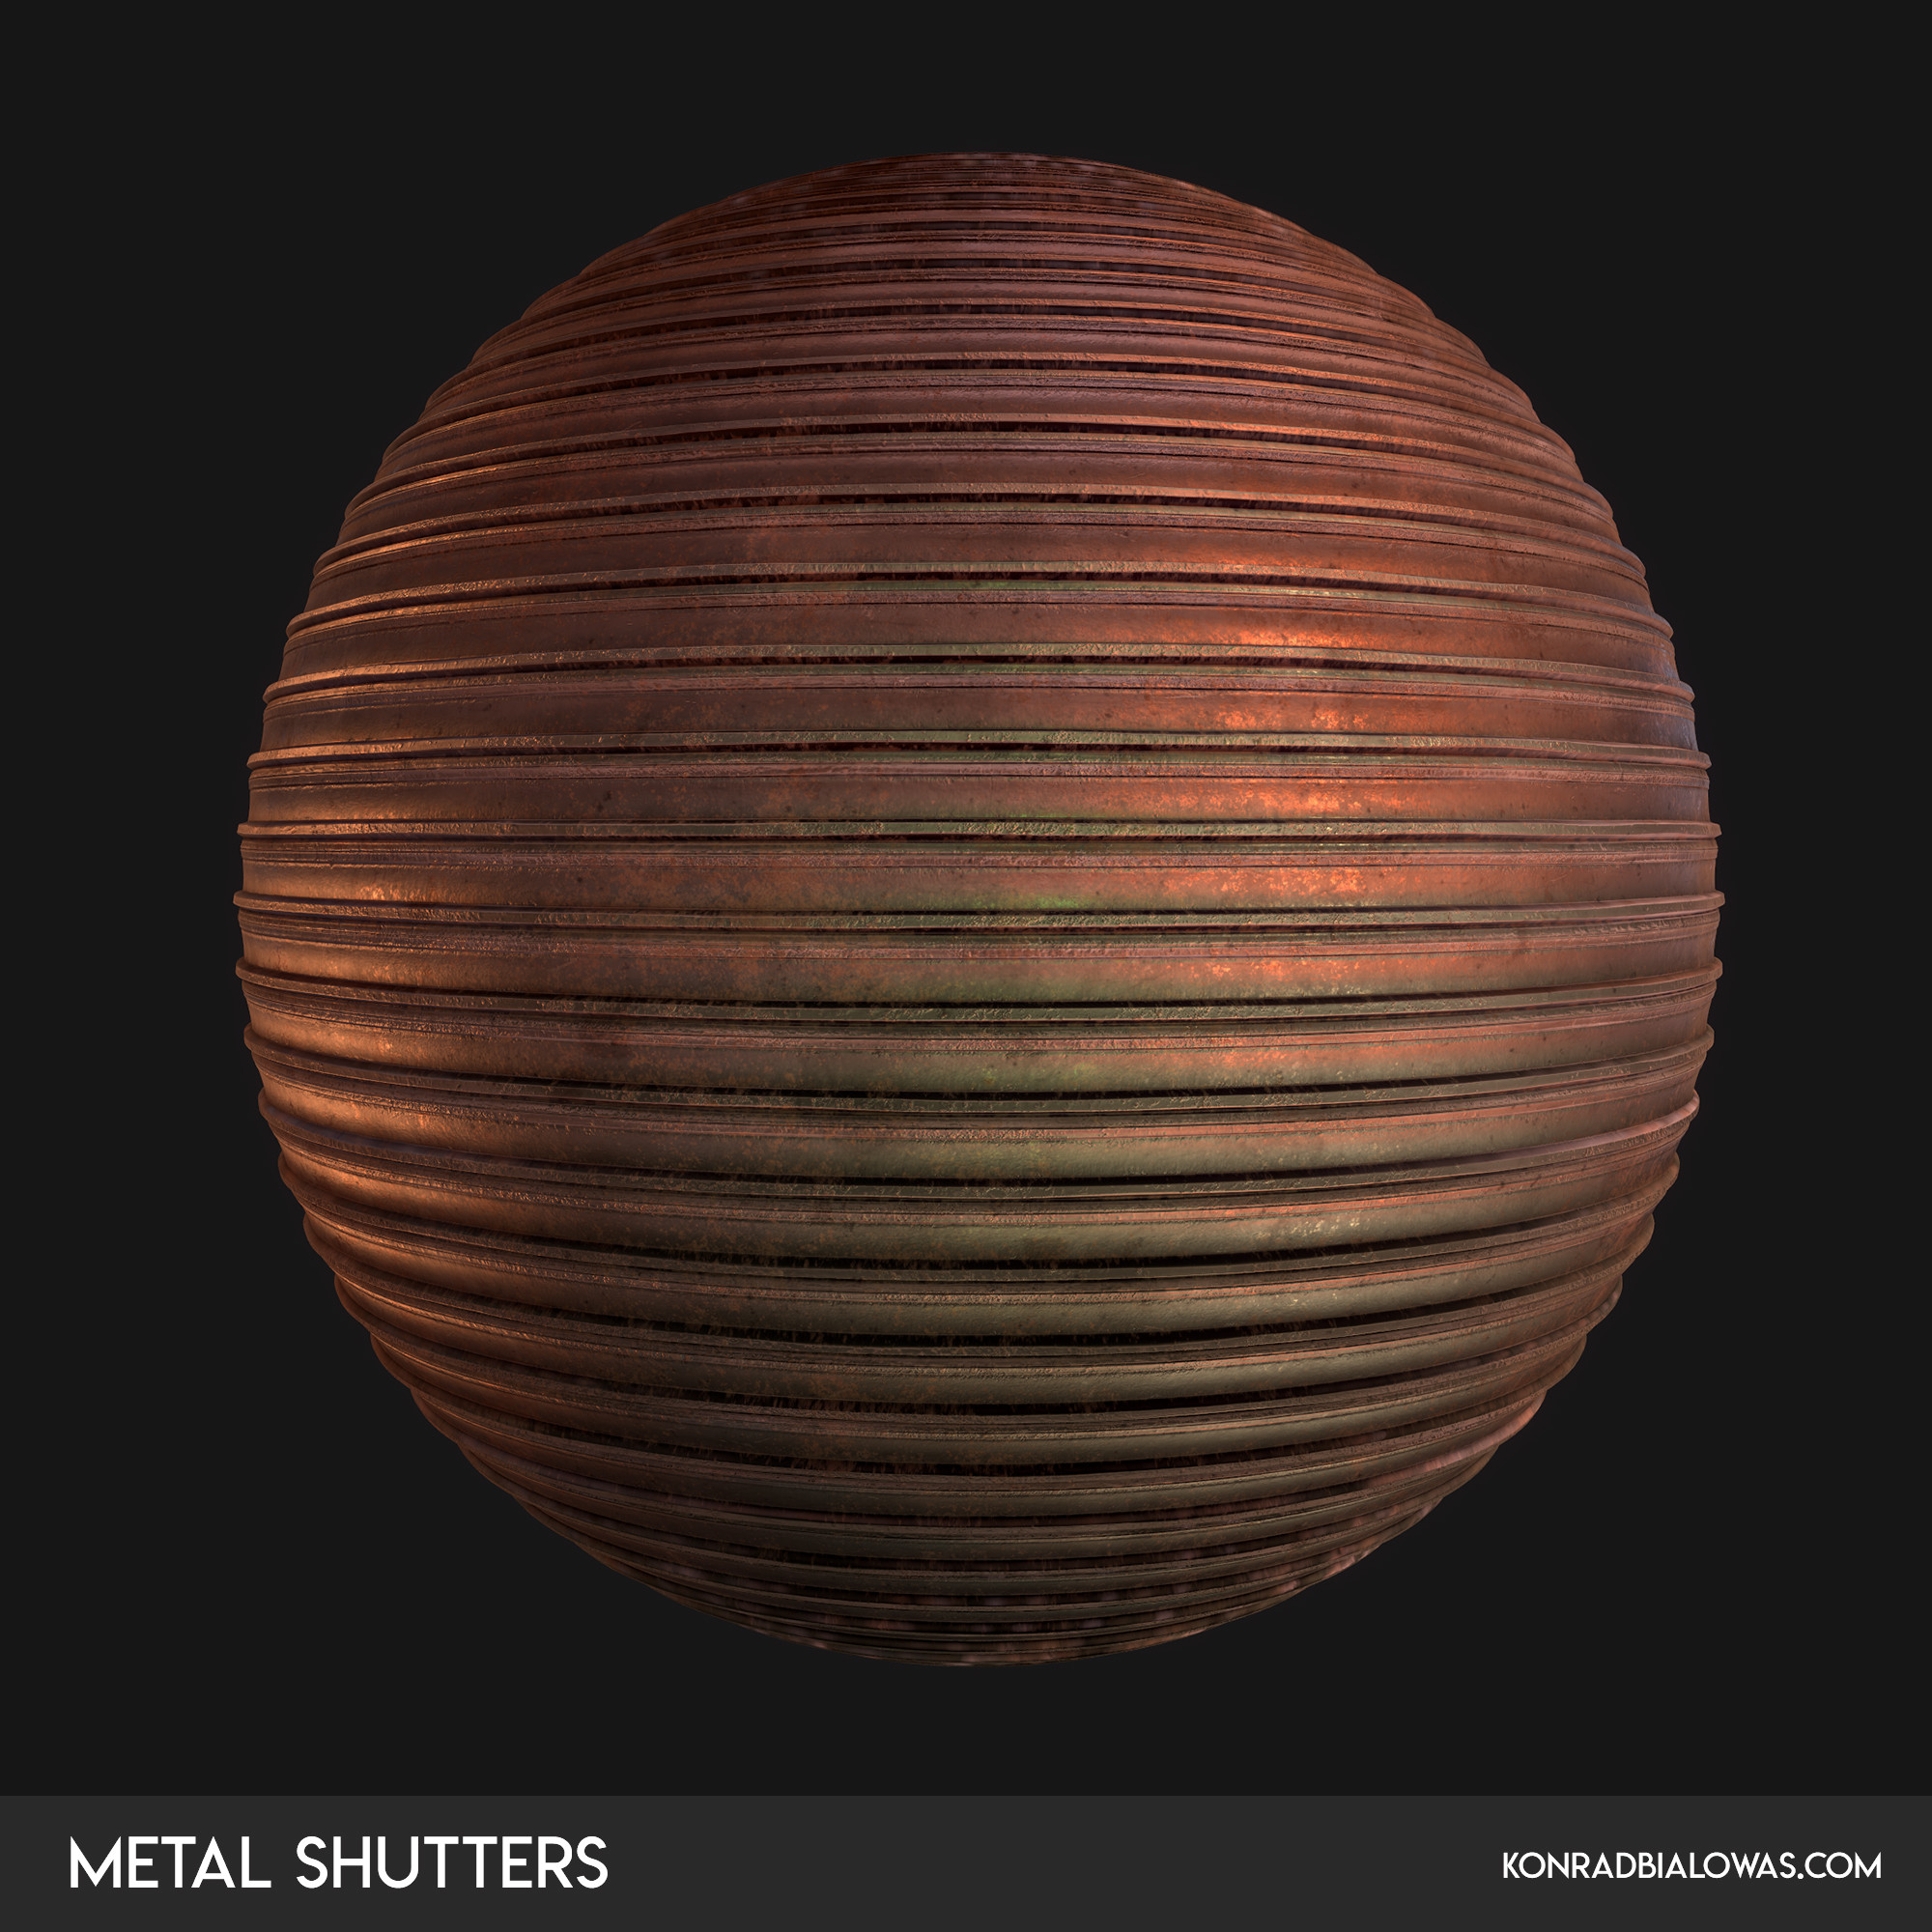 Metal Shutters procedural material created in Substance Designer